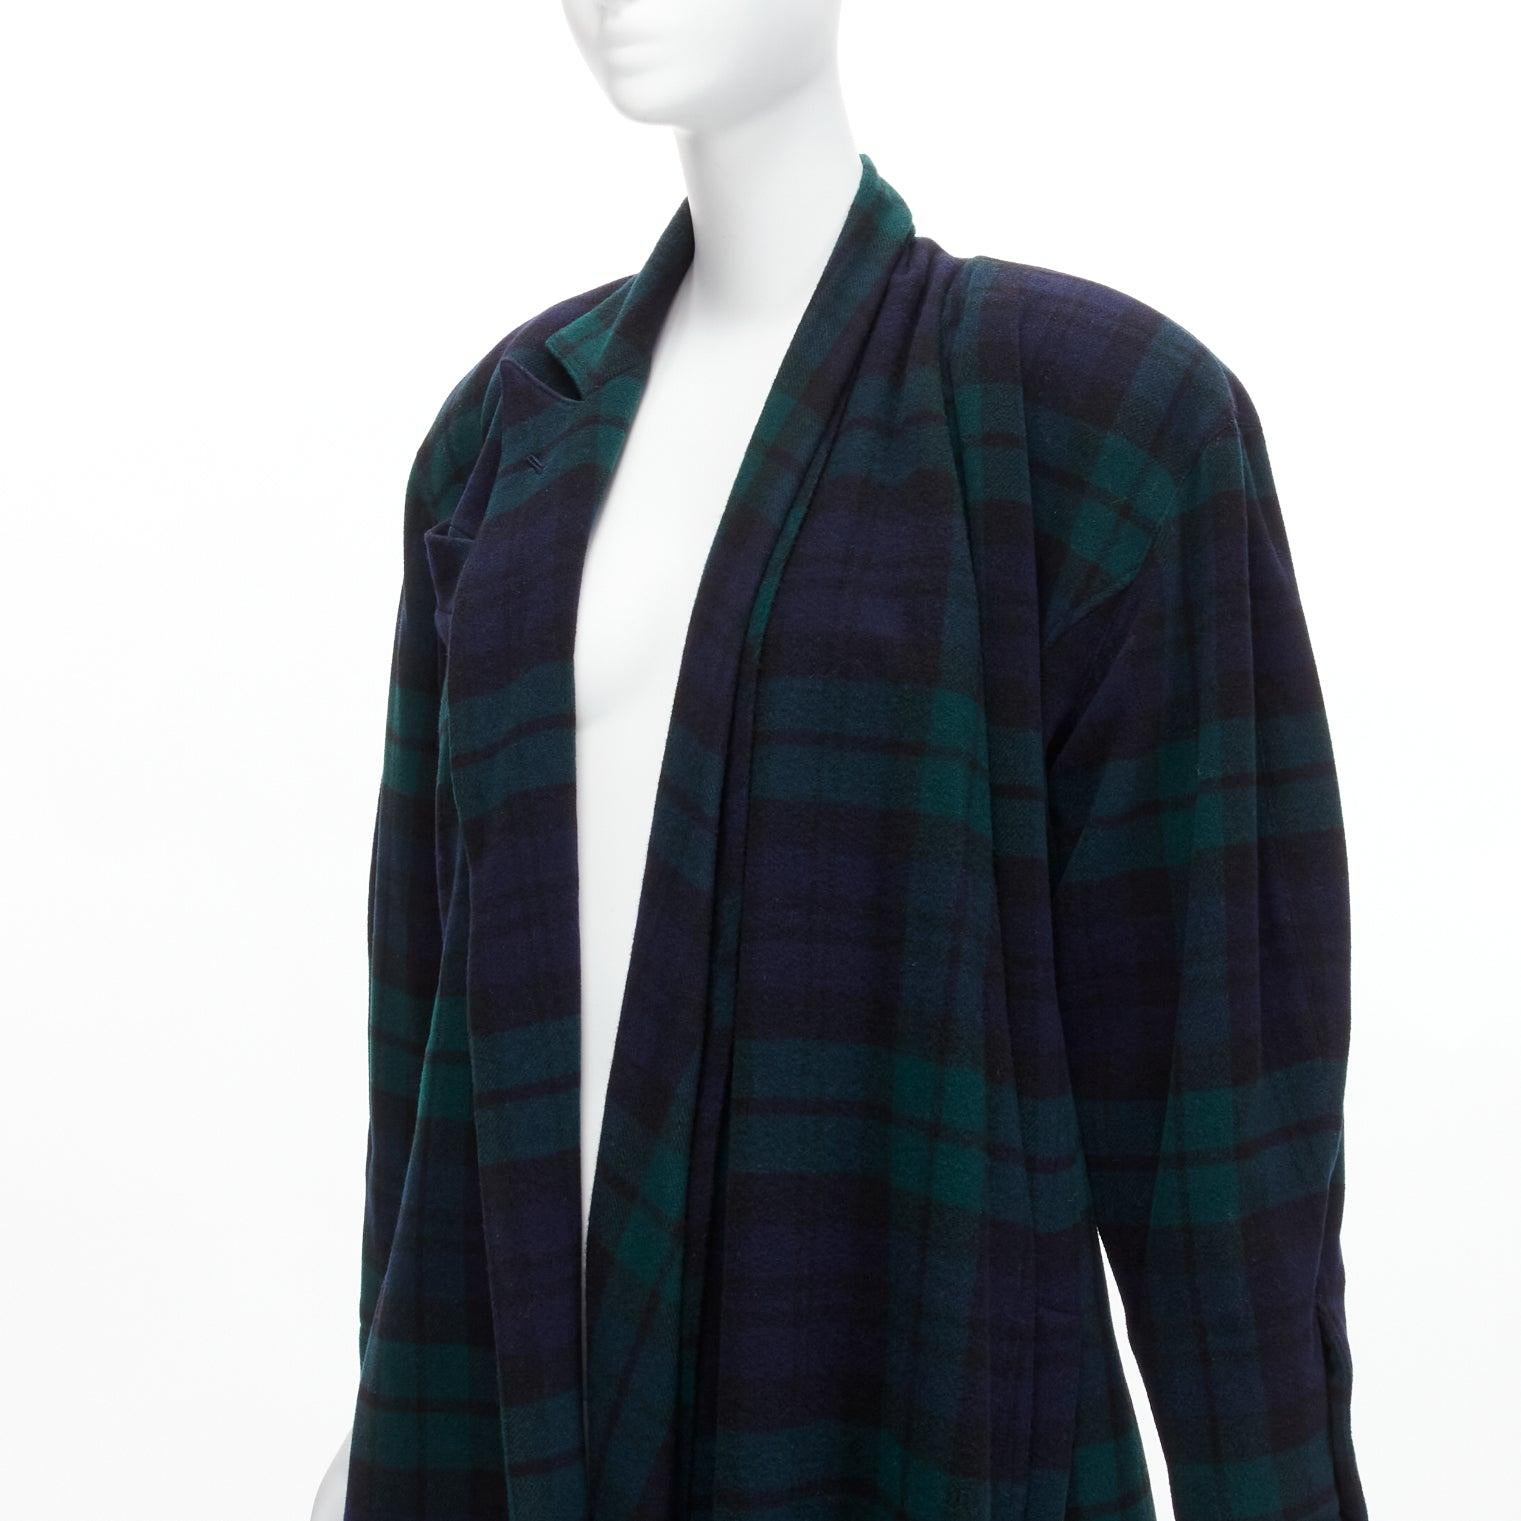 CLAUDE MONTANA green blue Scottish plaid scarf collar strong shoulder oversized coat IT9A3 S
Reference: TGAS/D00407
Brand: Claude Montana
Collection: Par Lapine
Material: Wool, Blend
Color: Blue, Green
Pattern: Checkered
Lining: Blue Fabric
Extra